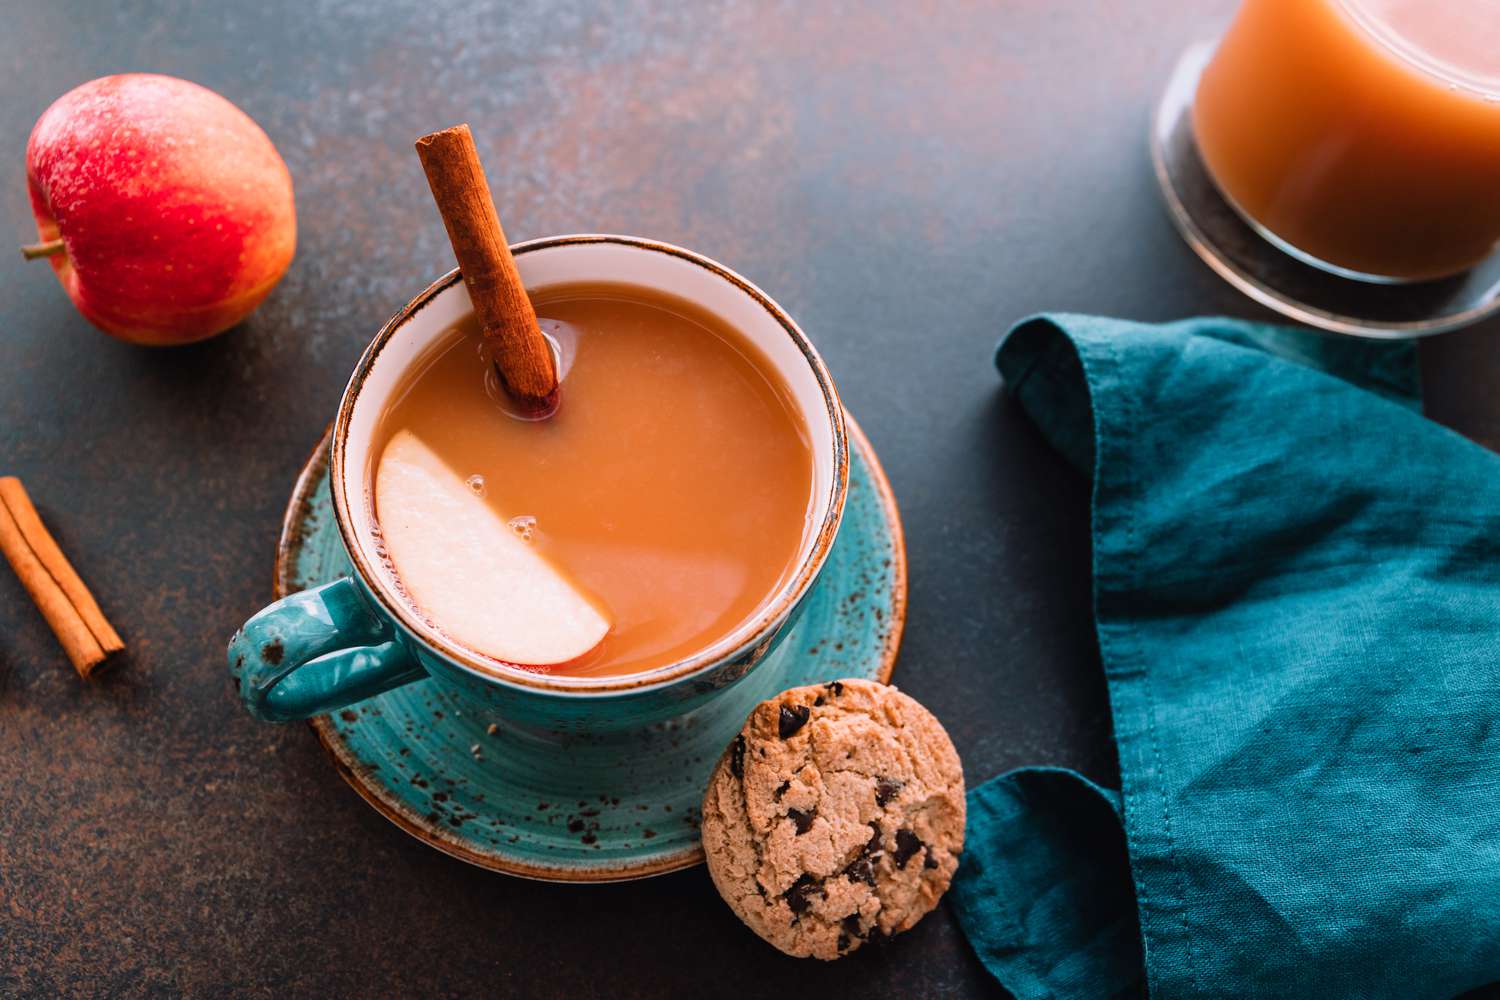 Cozy Up With Our Autumn Special -- Apple Masala Chaider Is The Tea Of The Season